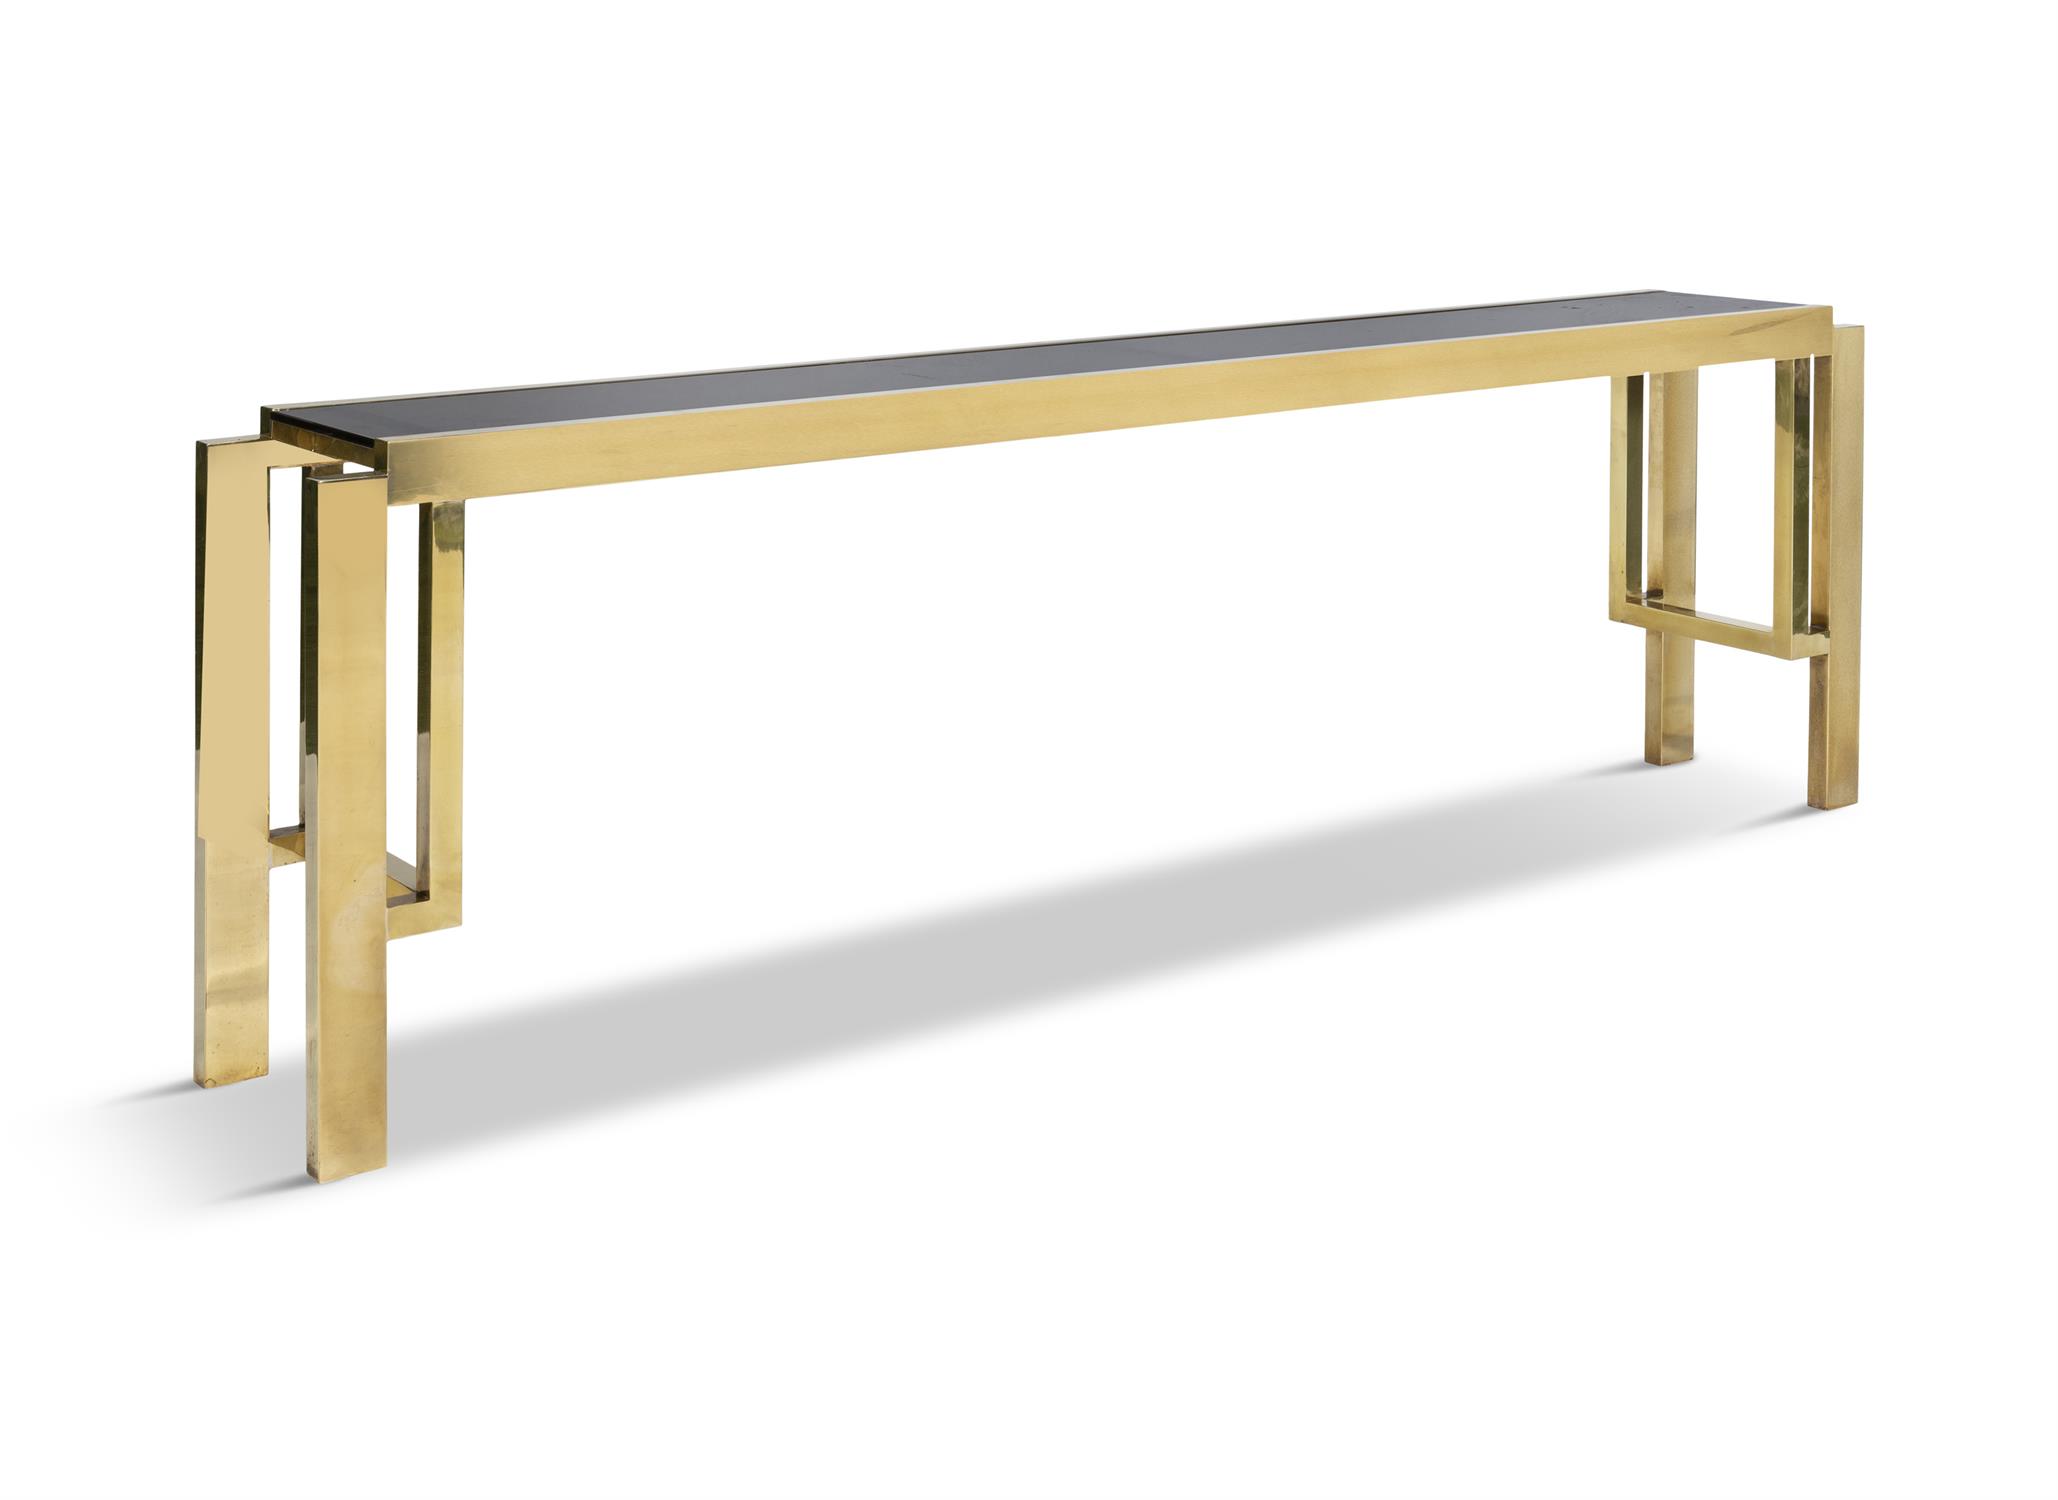 CONSOLE TABLE A brass plated console table with smoked glass top. Italy, c.1970. 195 x 29.